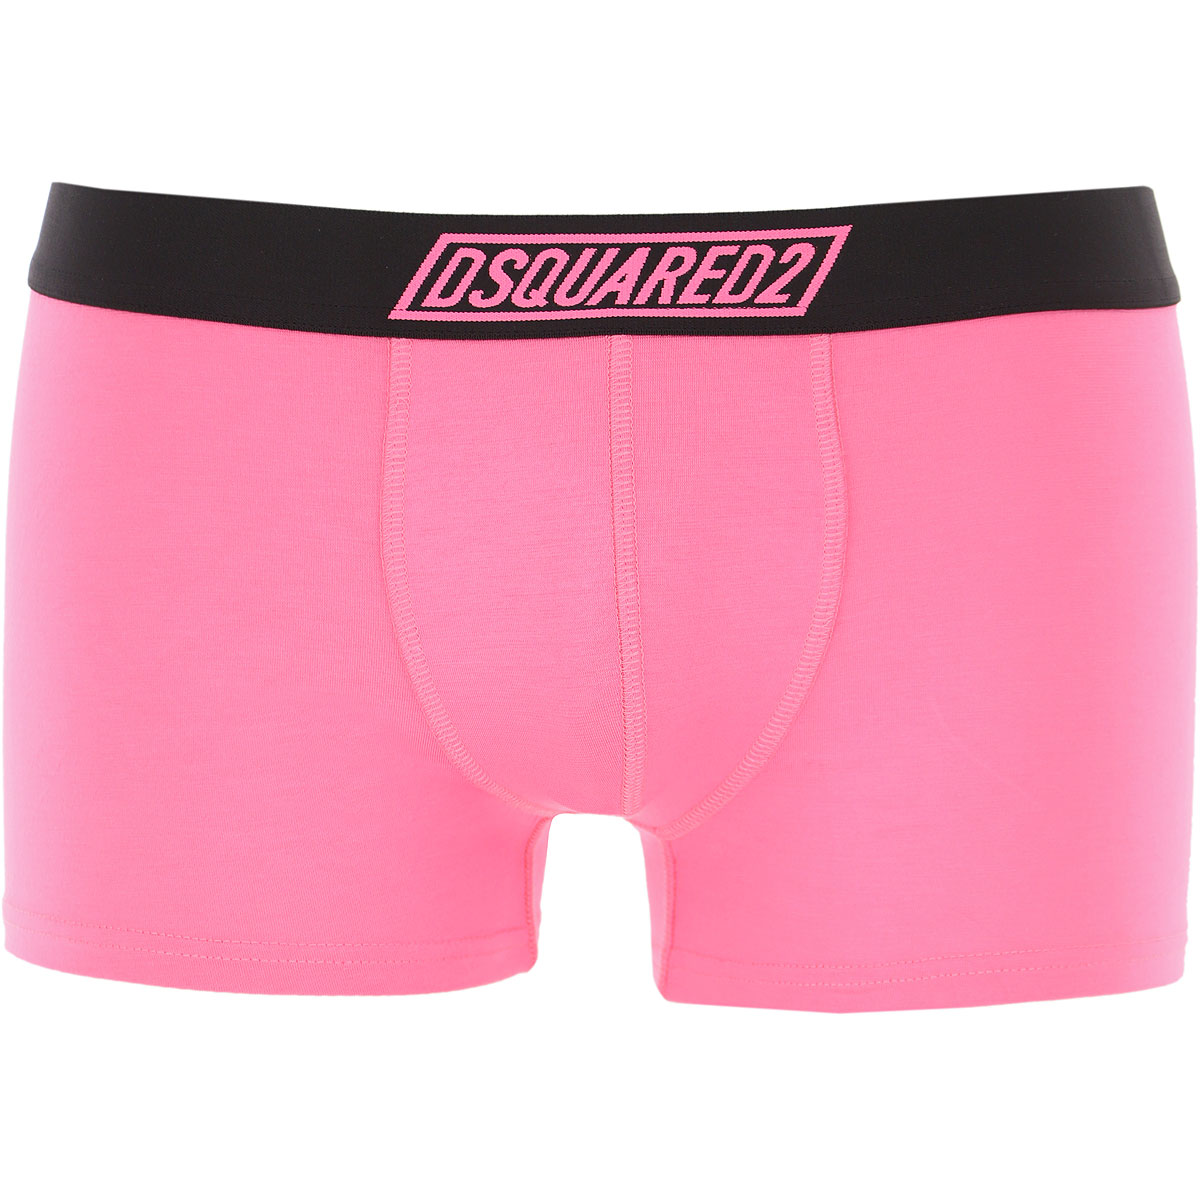 Mens Underwear Dsquared2, Style code: d9lc63480-672-